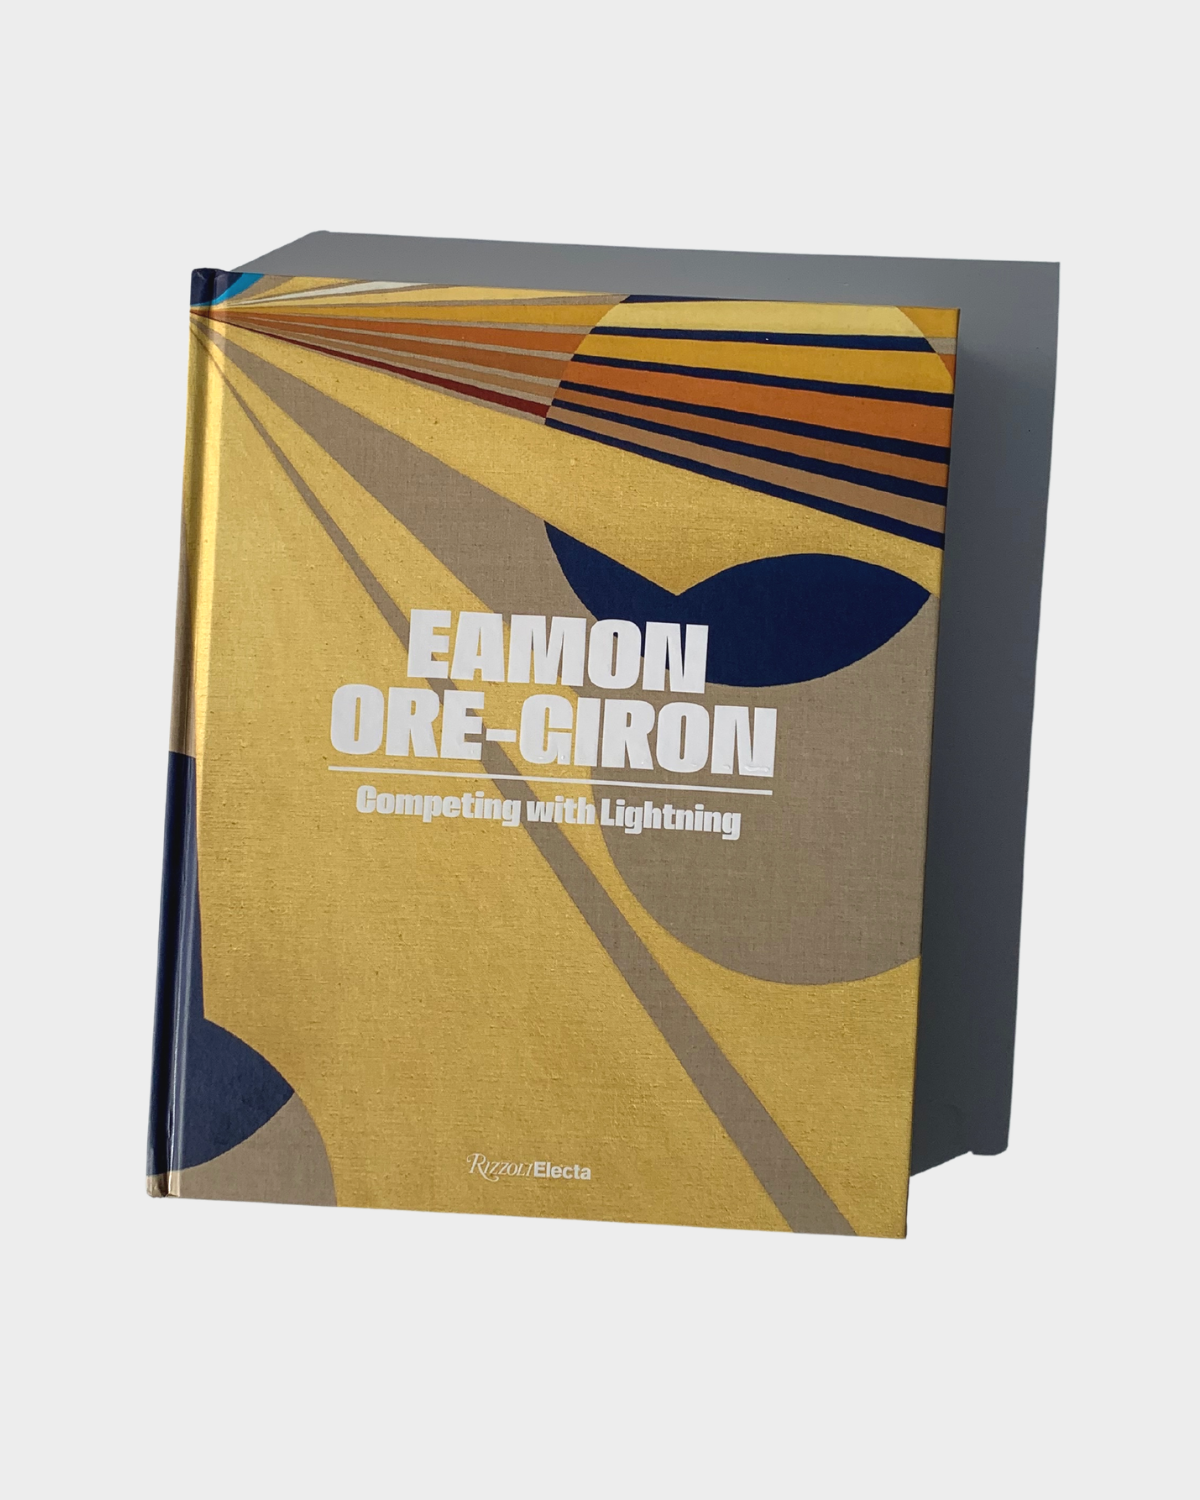 Exhibition catalogue photographed on a white background under harsh sunlight that creates a shadow. The white, bold text on the book reads, “Eamon Ore-Giron” and “Competing with Lightning.” The catalogue cover art is made up of geometric shapes in a primarily glittering gold color. 